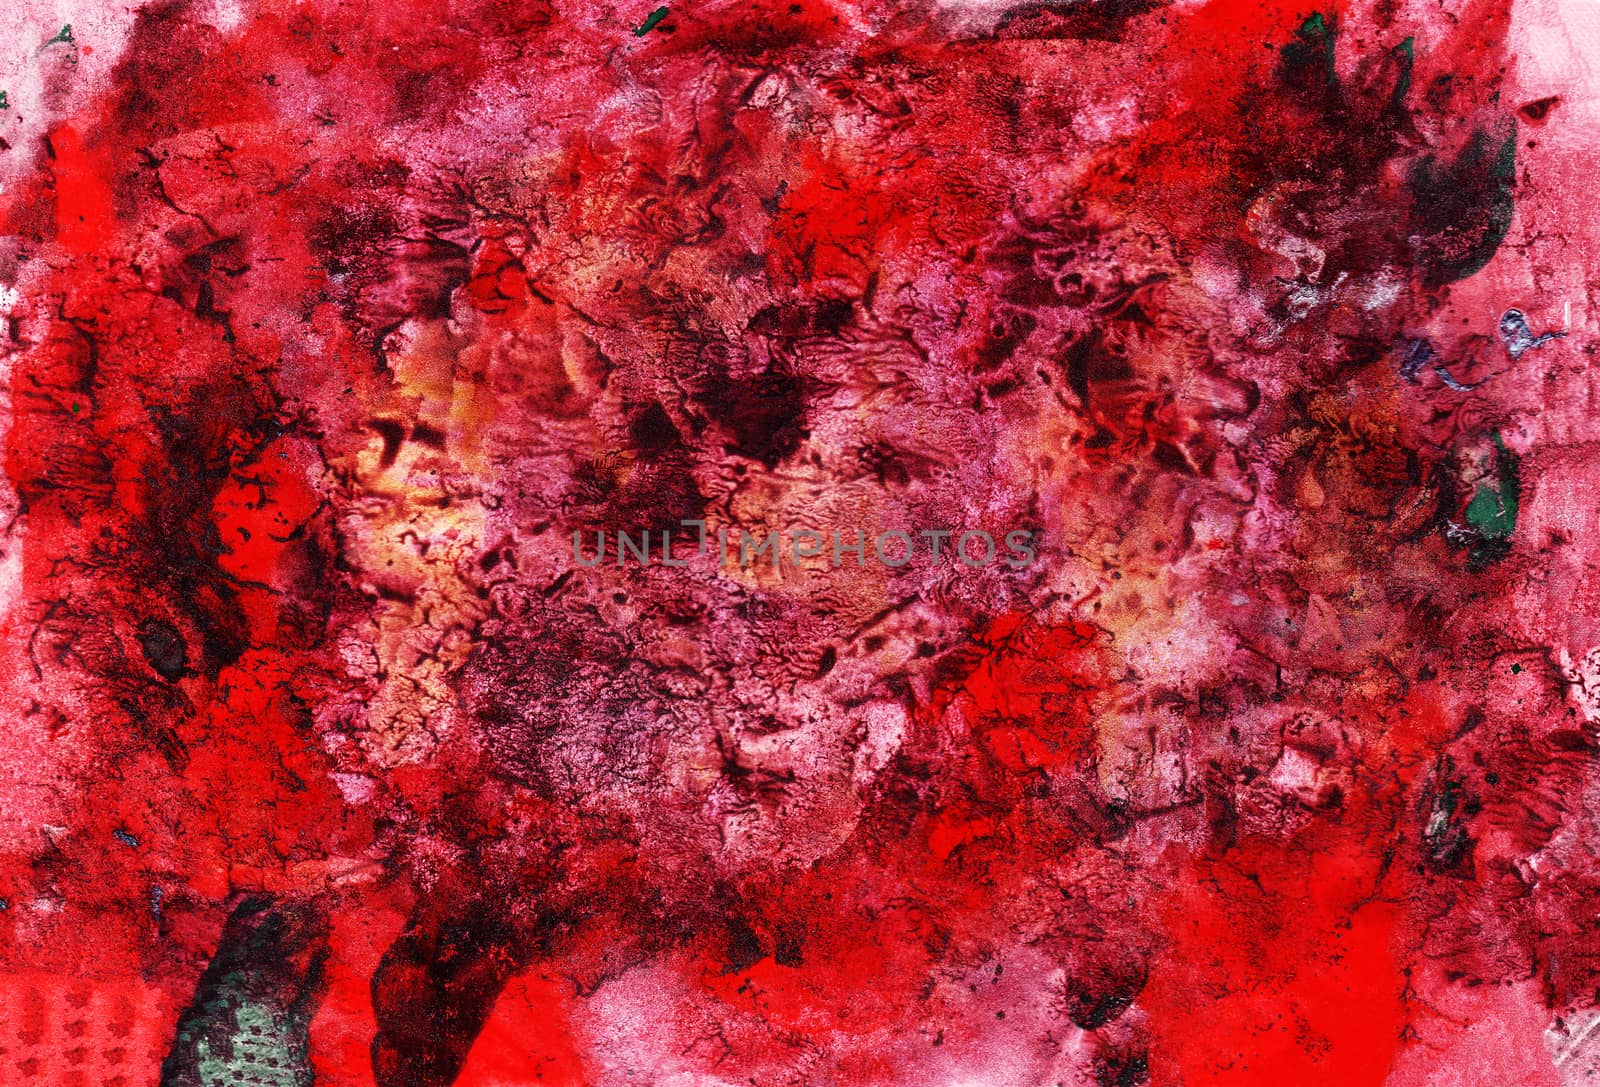 Red abstract background, hand painted texture, splashes, drops of paint, paint smears. Design for backgrounds, wallpapers, covers and packaging.